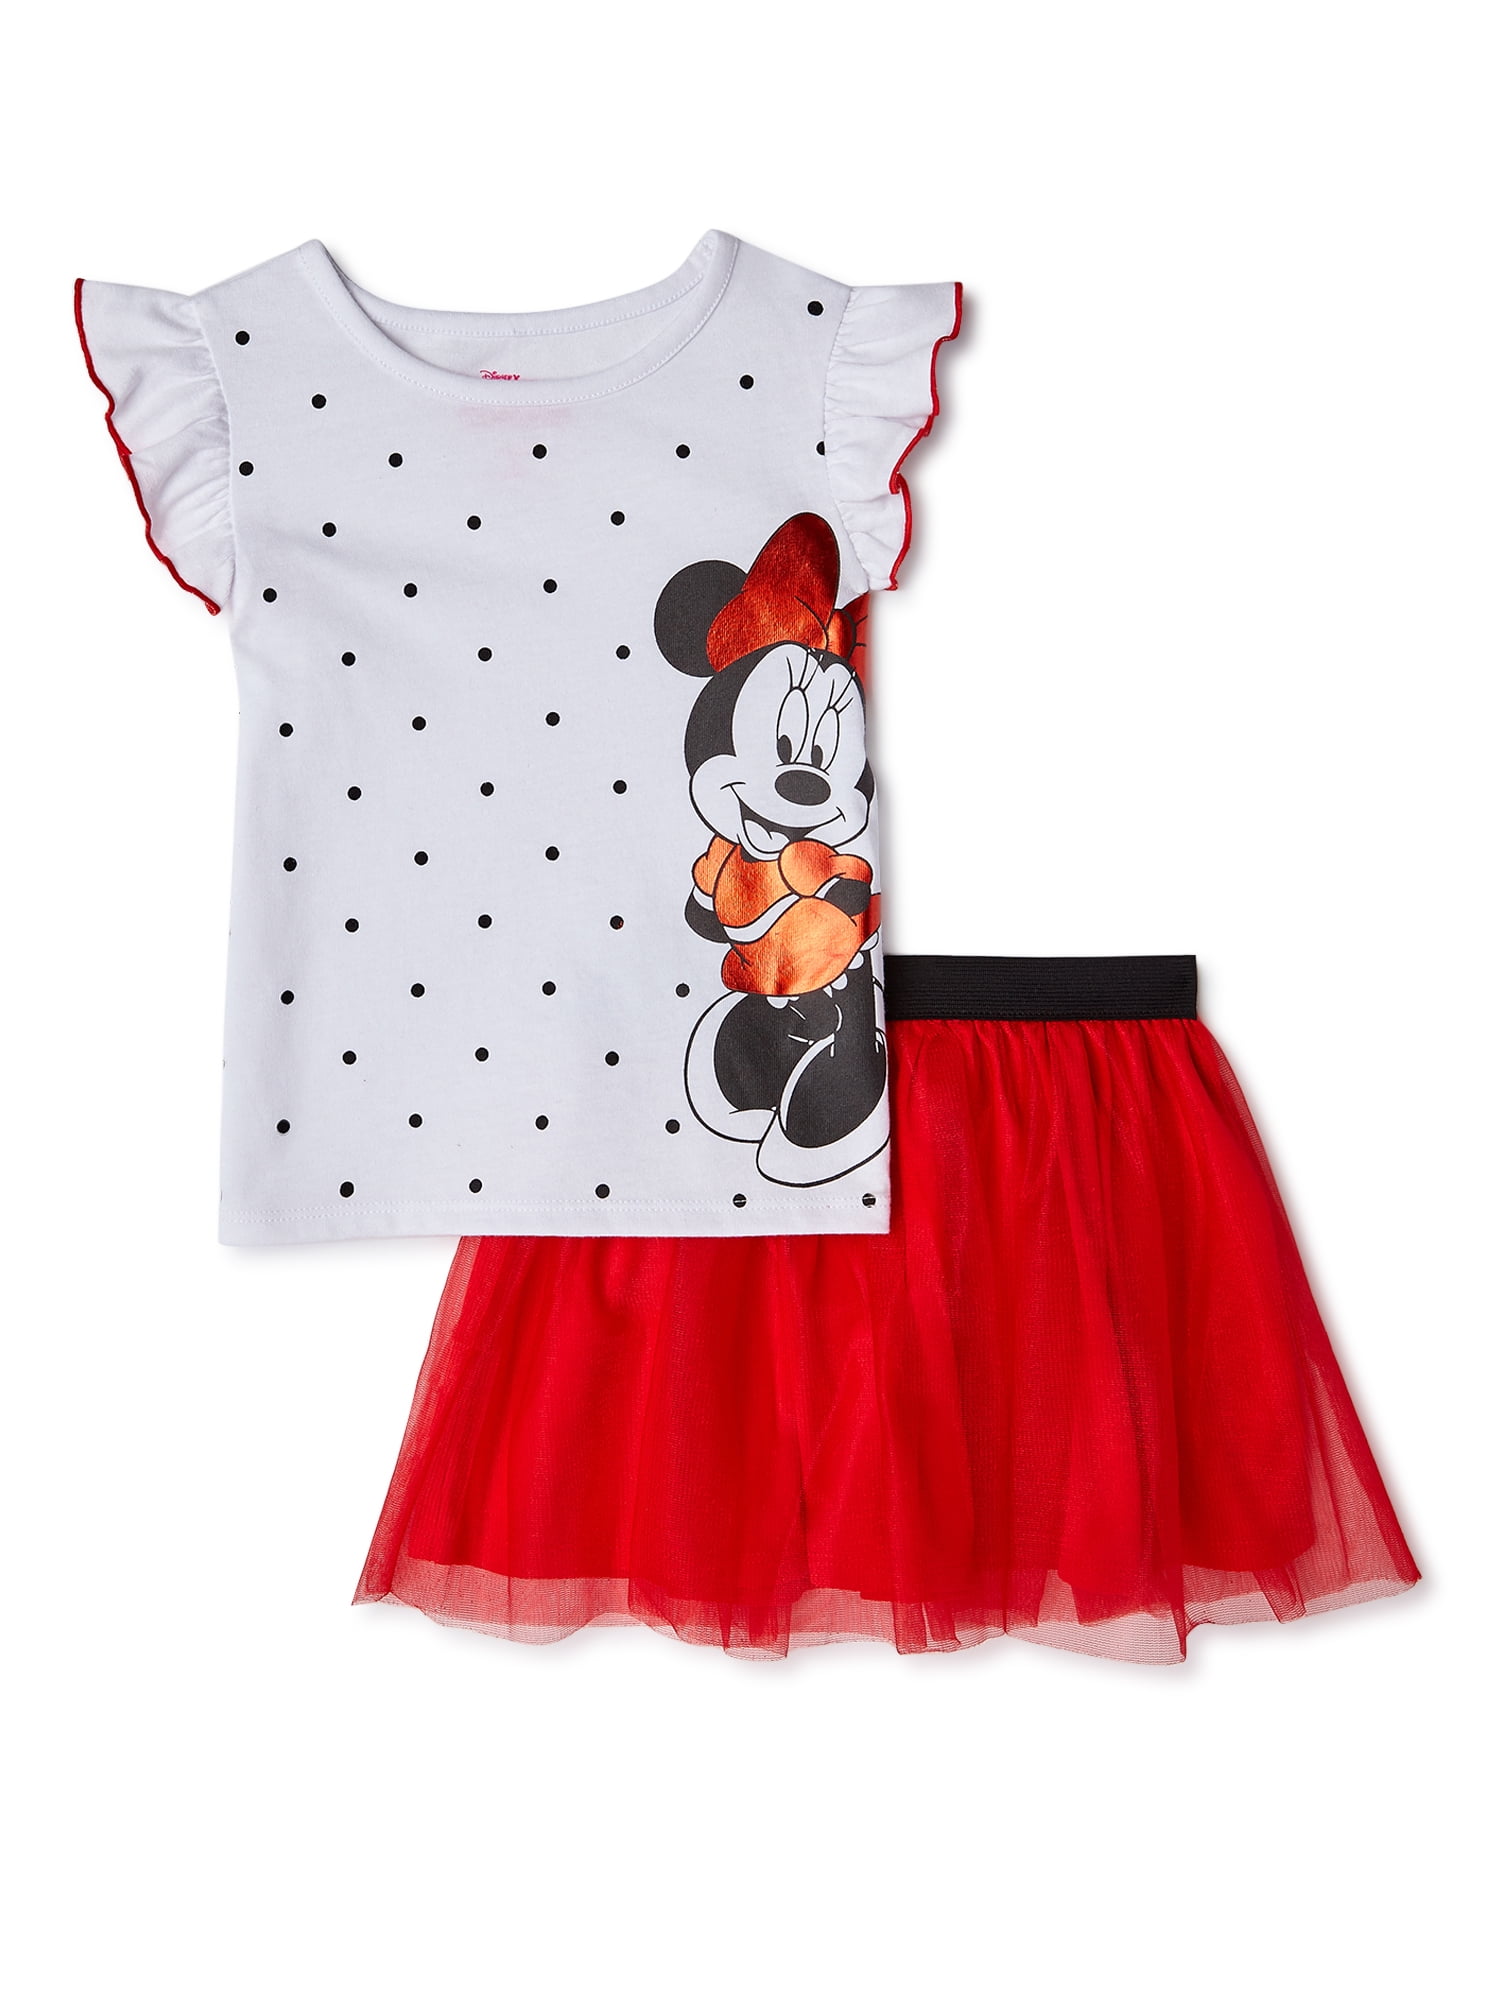 Minnie Mouse Toddler Girls Belle Two-Piece Skort Set Size 2T 3T 4T 